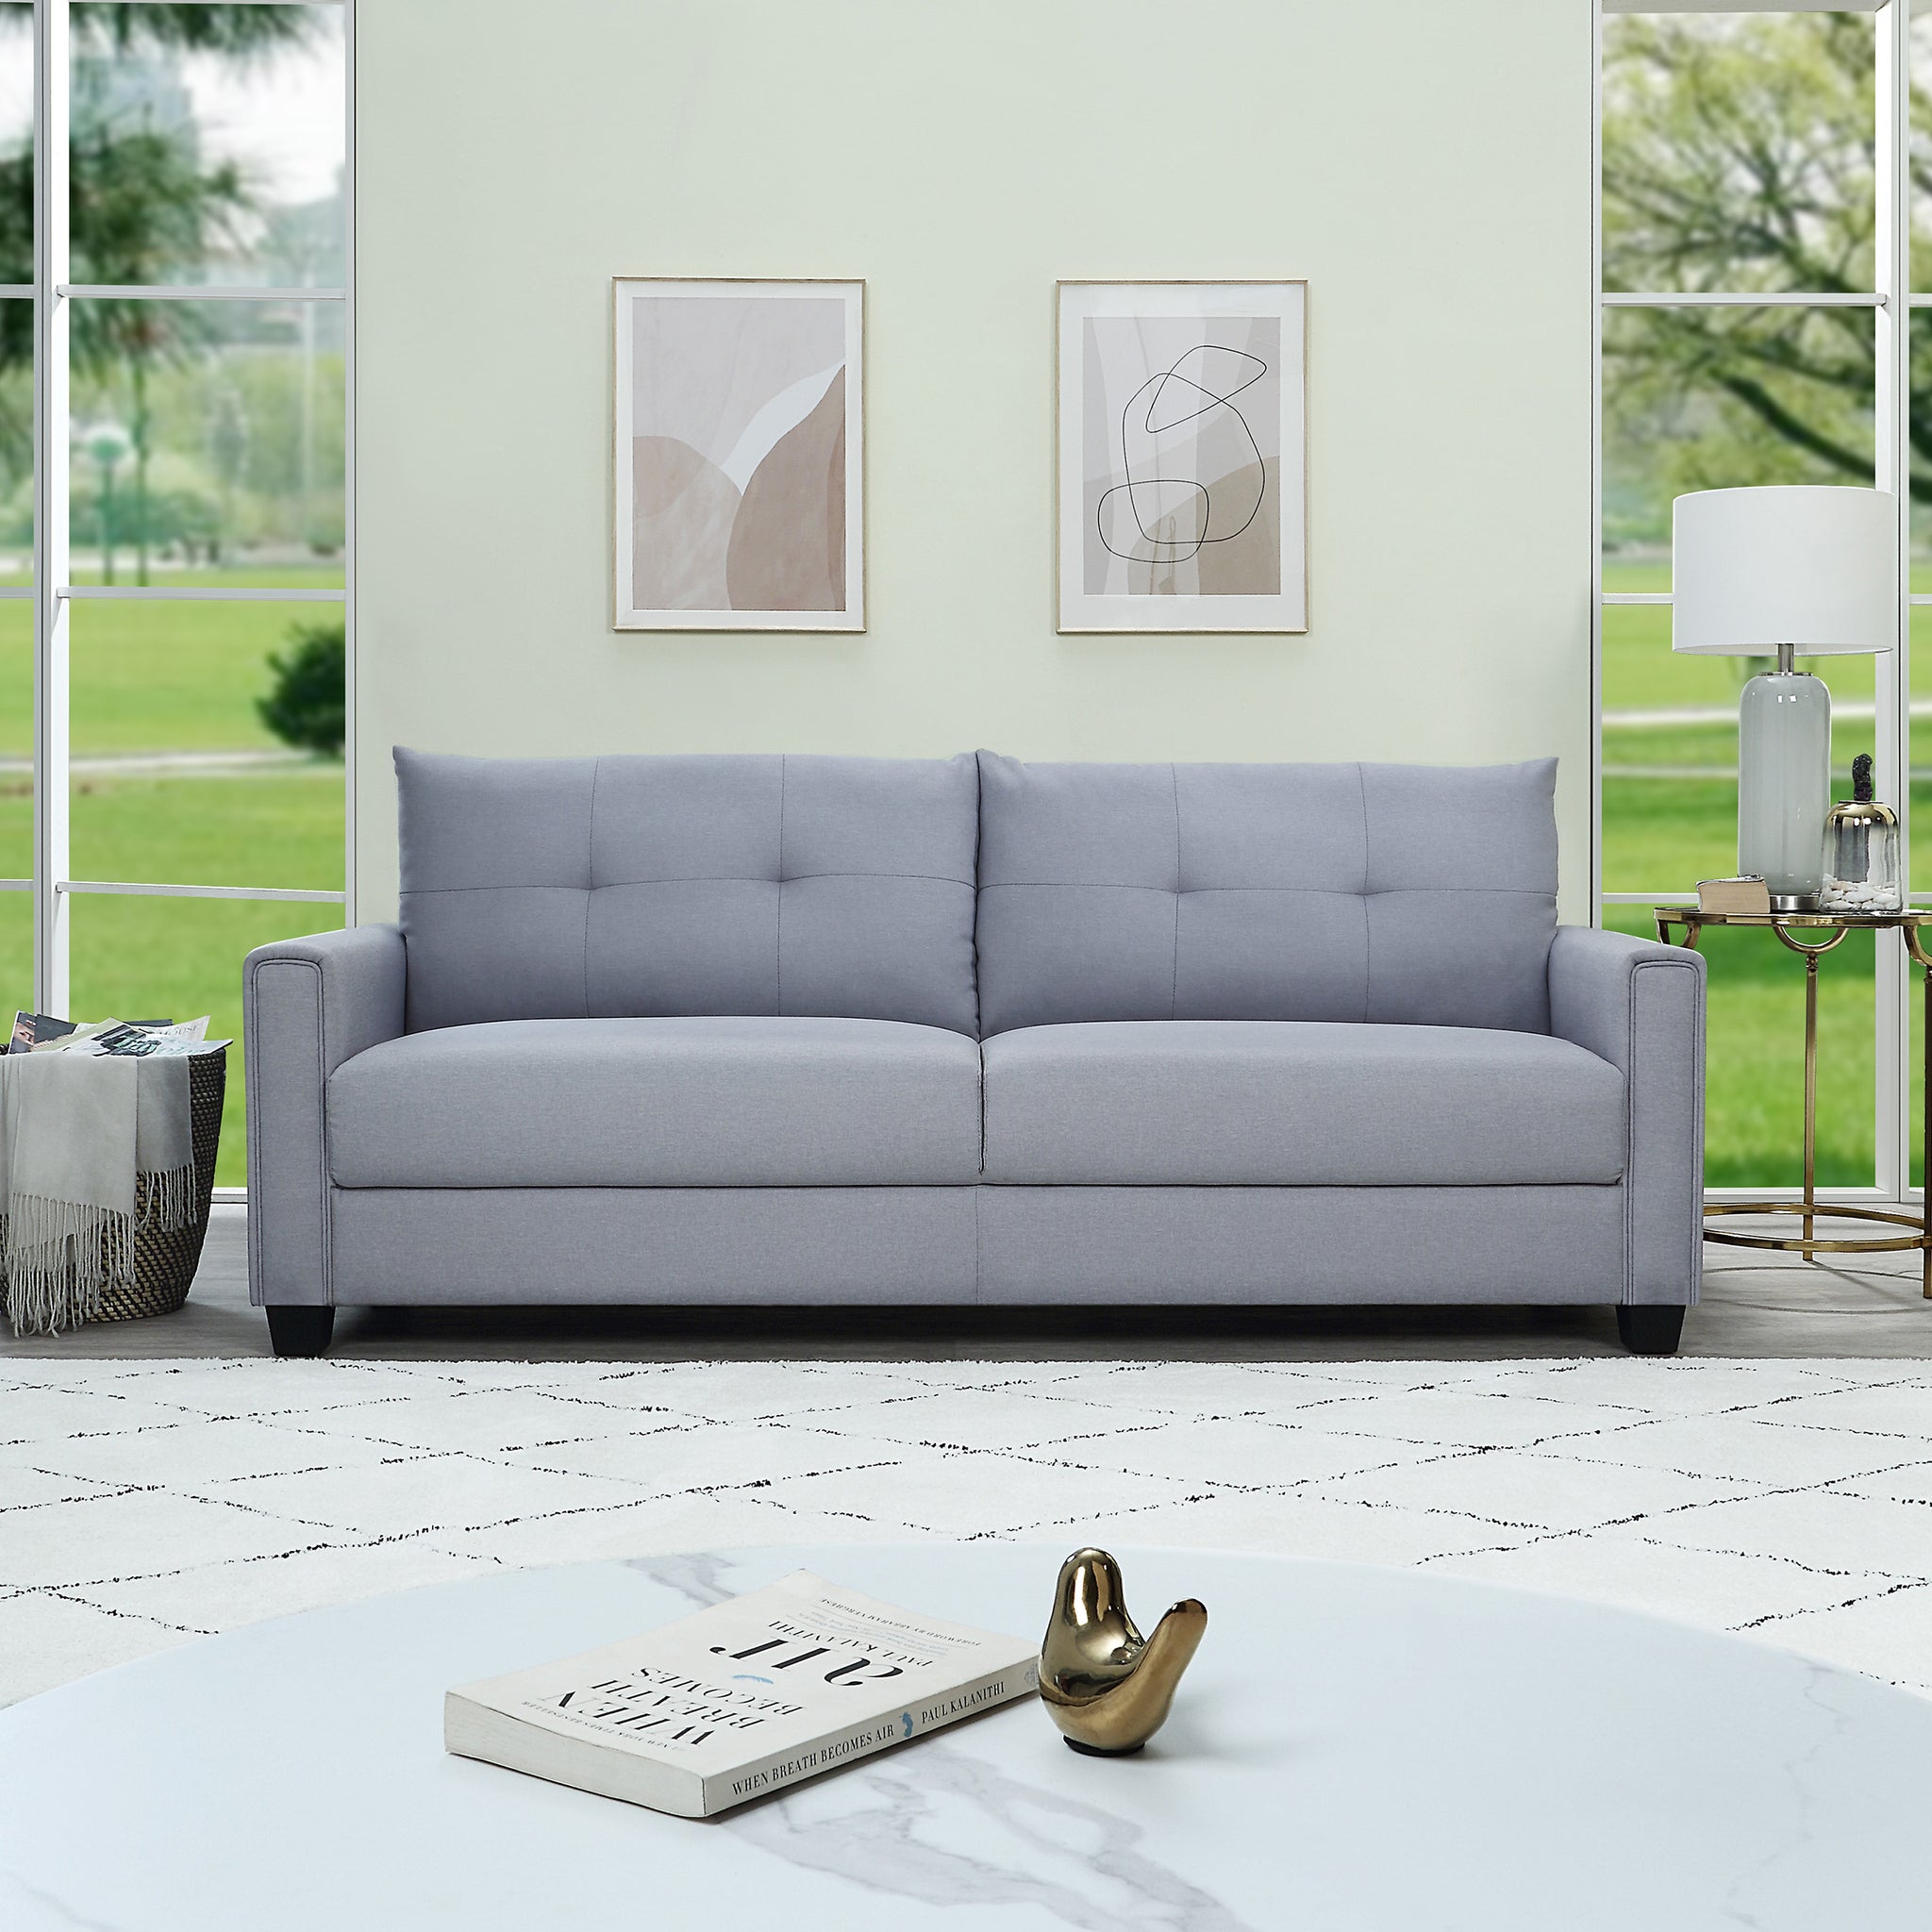 Linen Fabric Upholstery sofa Tufted Cushions Easy light grey-wood-primary living